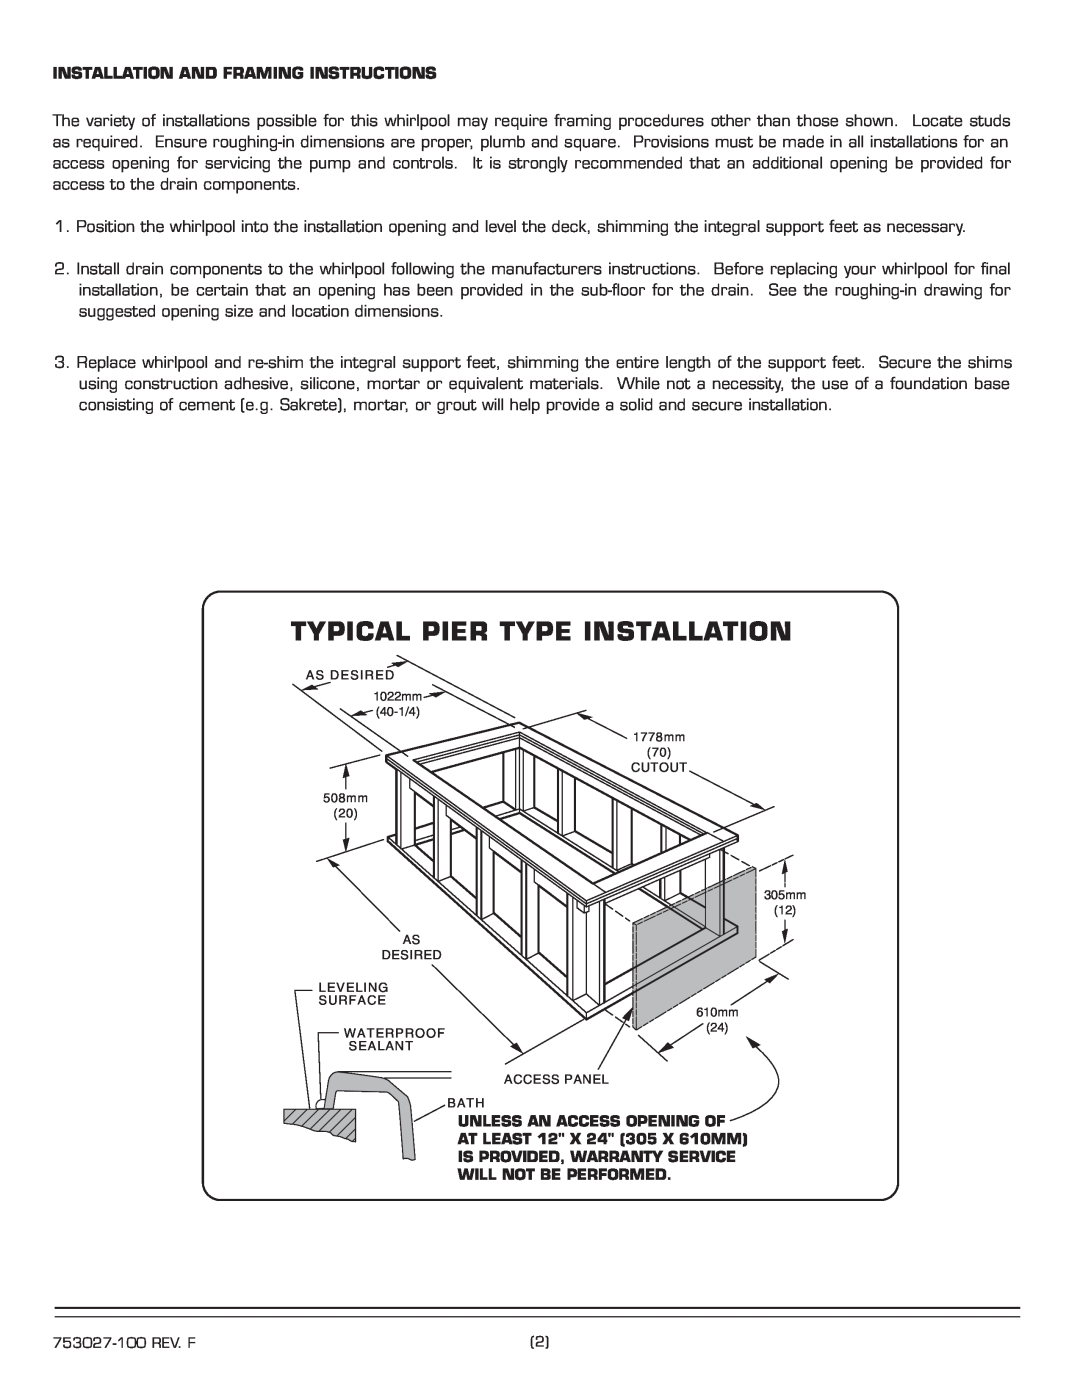 American Standard Whirlpool/Bathing Pool, 2742.XXXX Typical Pier Type Installation, Installation And Framing Instructions 